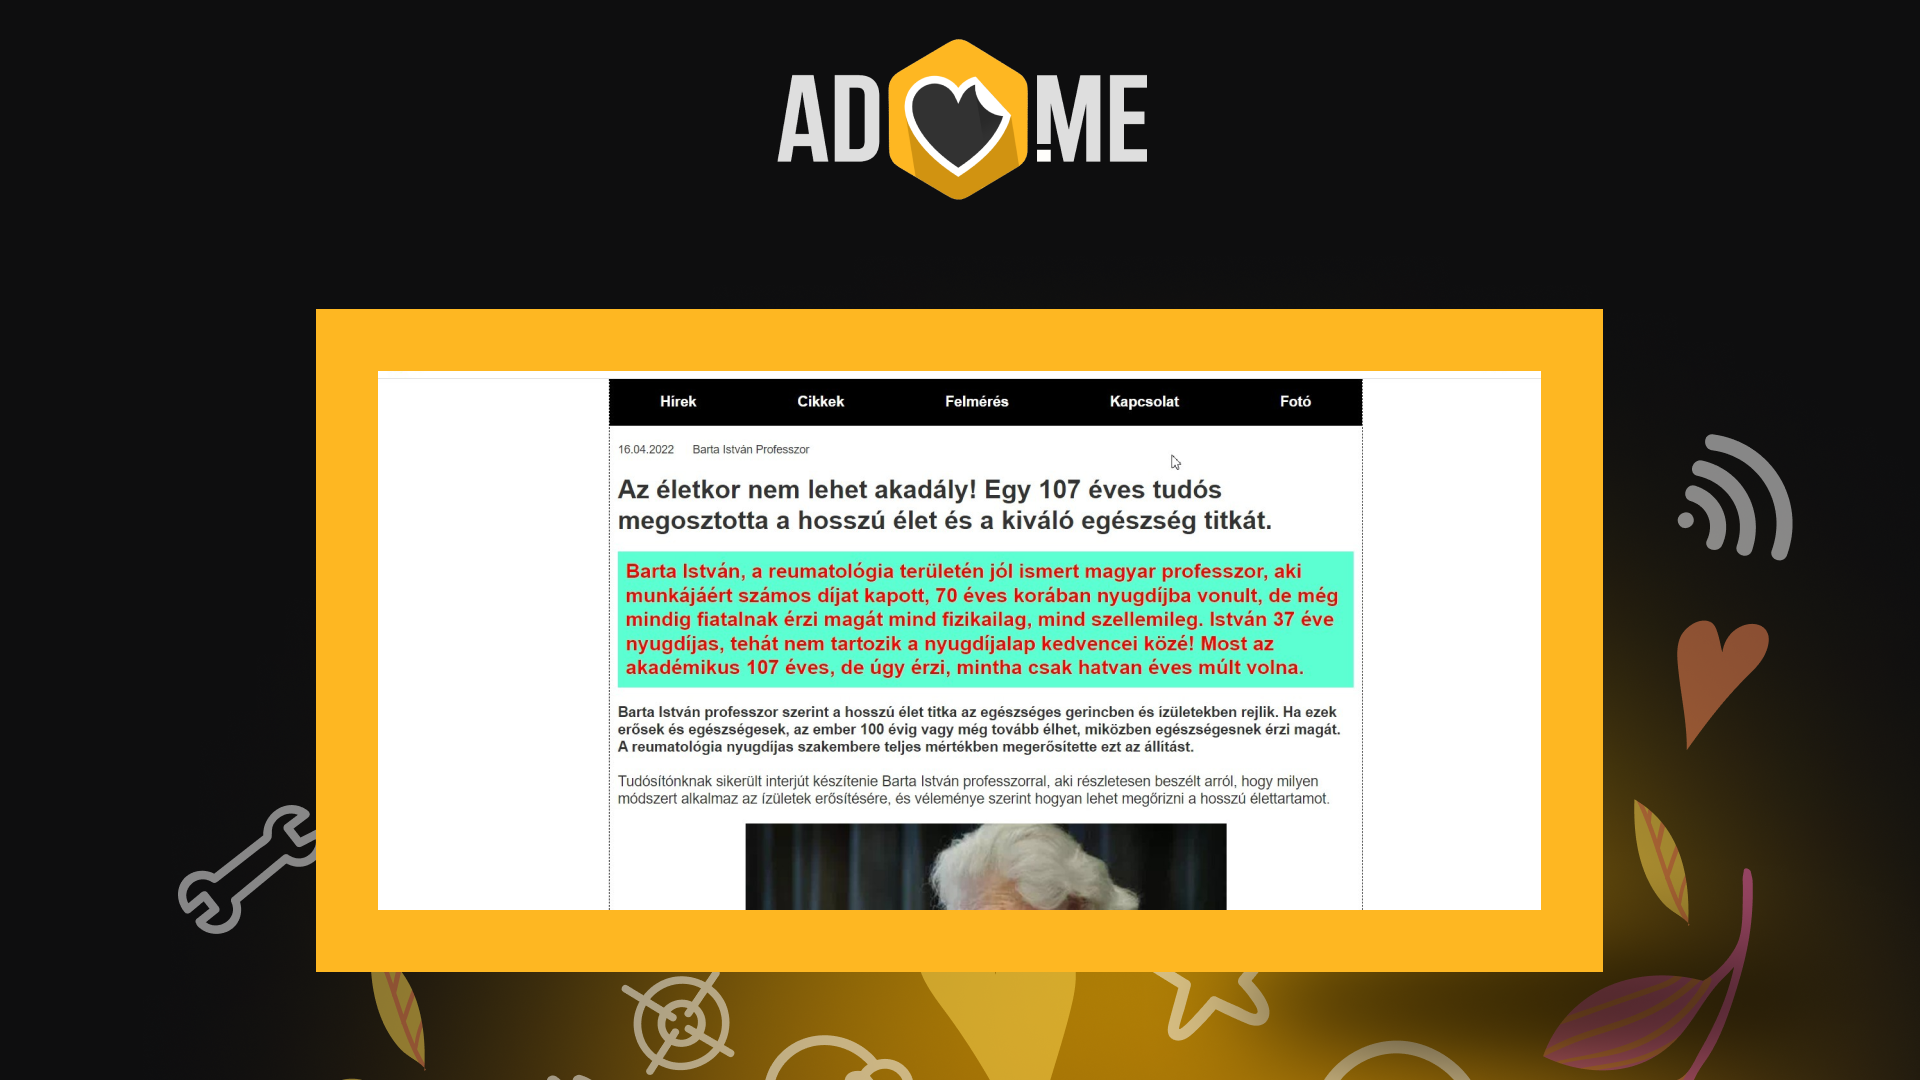 Ultimate guide to searching for affiliate approaches and links through Adheart